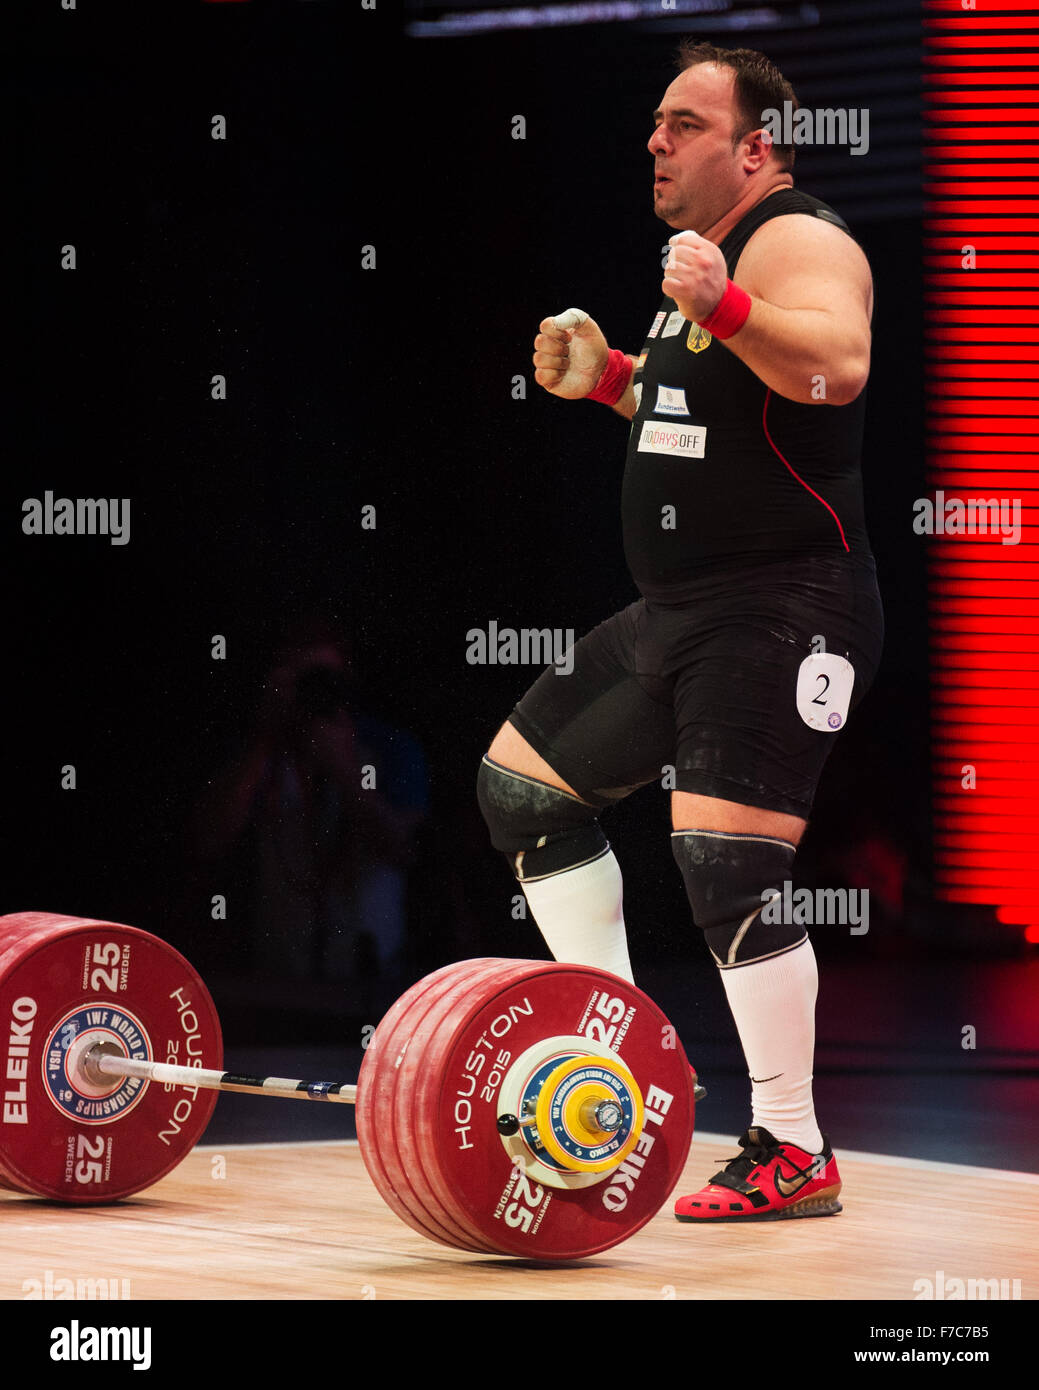 November 26, 2015: Almir Velagic of Germany celebrates a successful 238kg clean and jerk in the Men's 105+ Class at the World Weightlfting Championships in Houston, Texas. Brent Clark/Alamy Live News Stock Photo